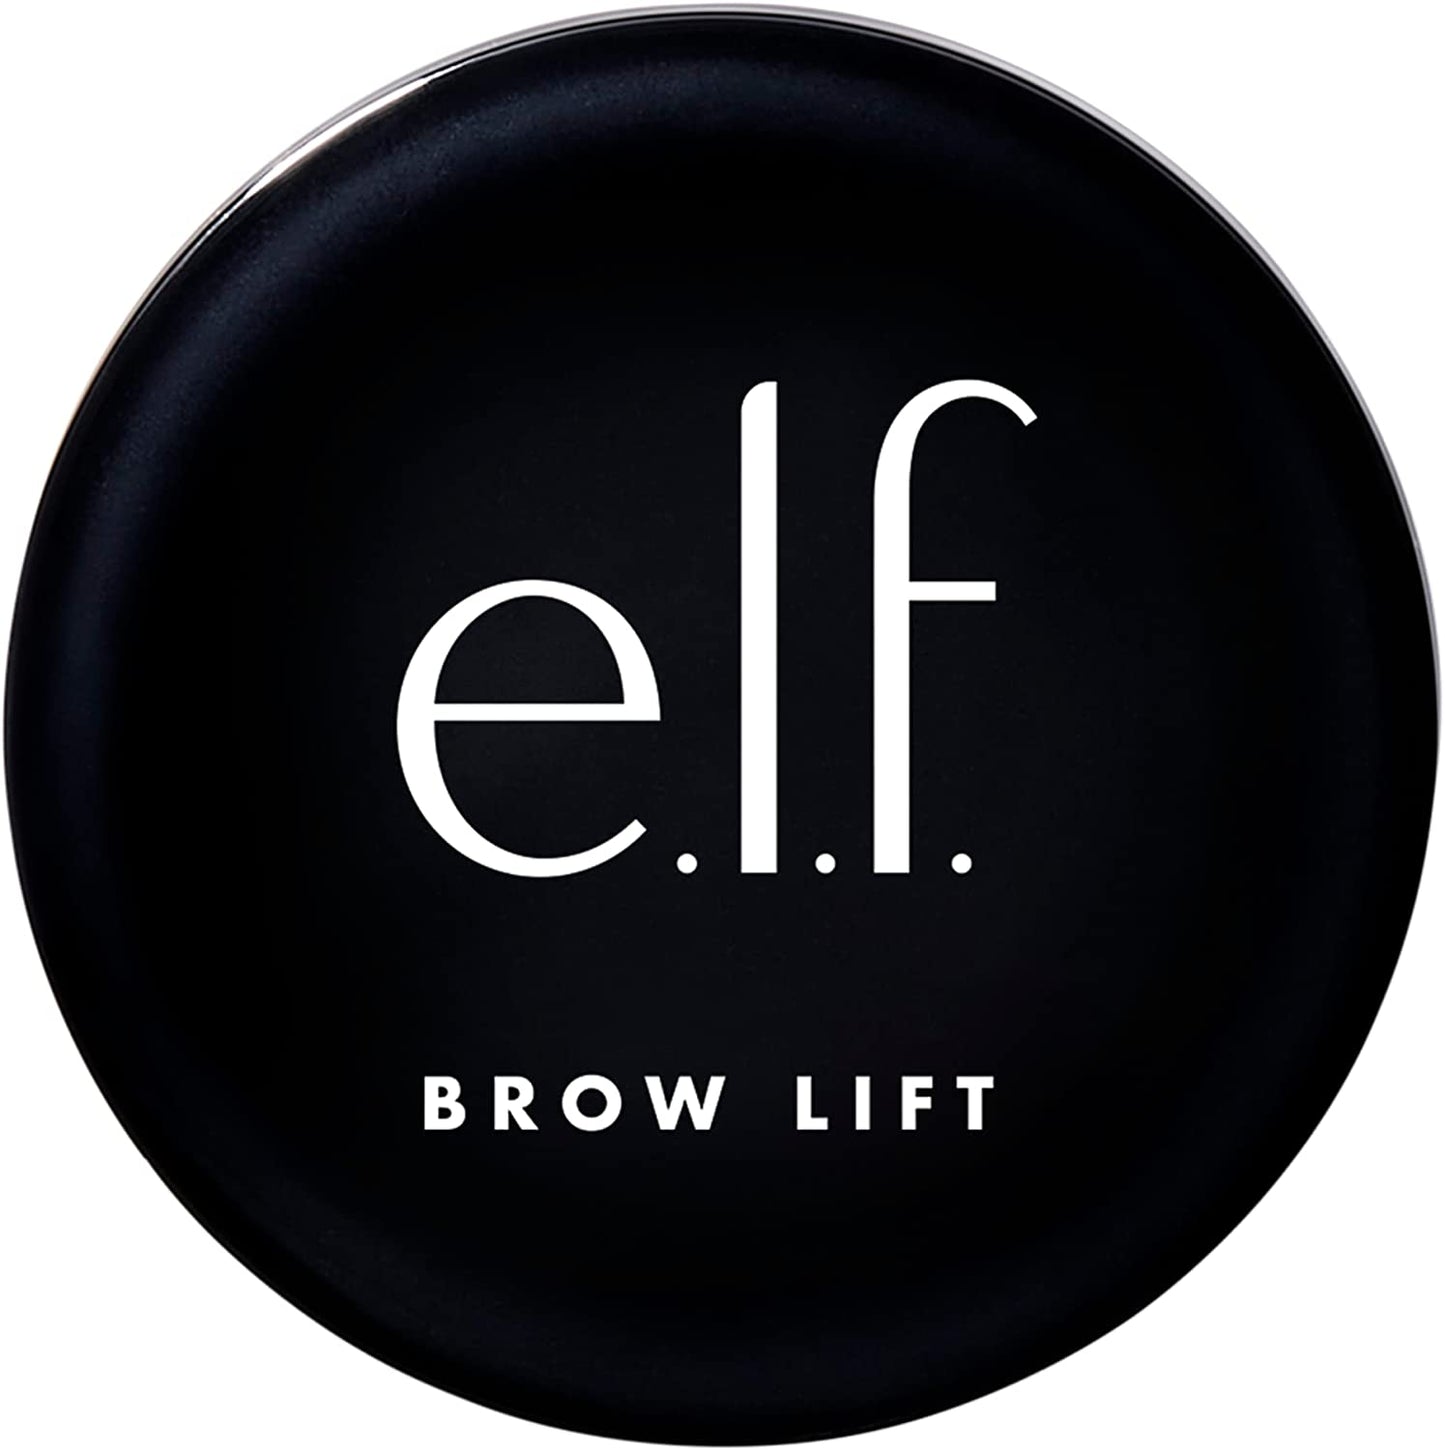 Brow Lift, Clear Eyebrow Shaping Wax for Holding Brows in Place, Creates a Fluffy Feathered Look - FoxMart™️ - e.l.f. Cosmetics